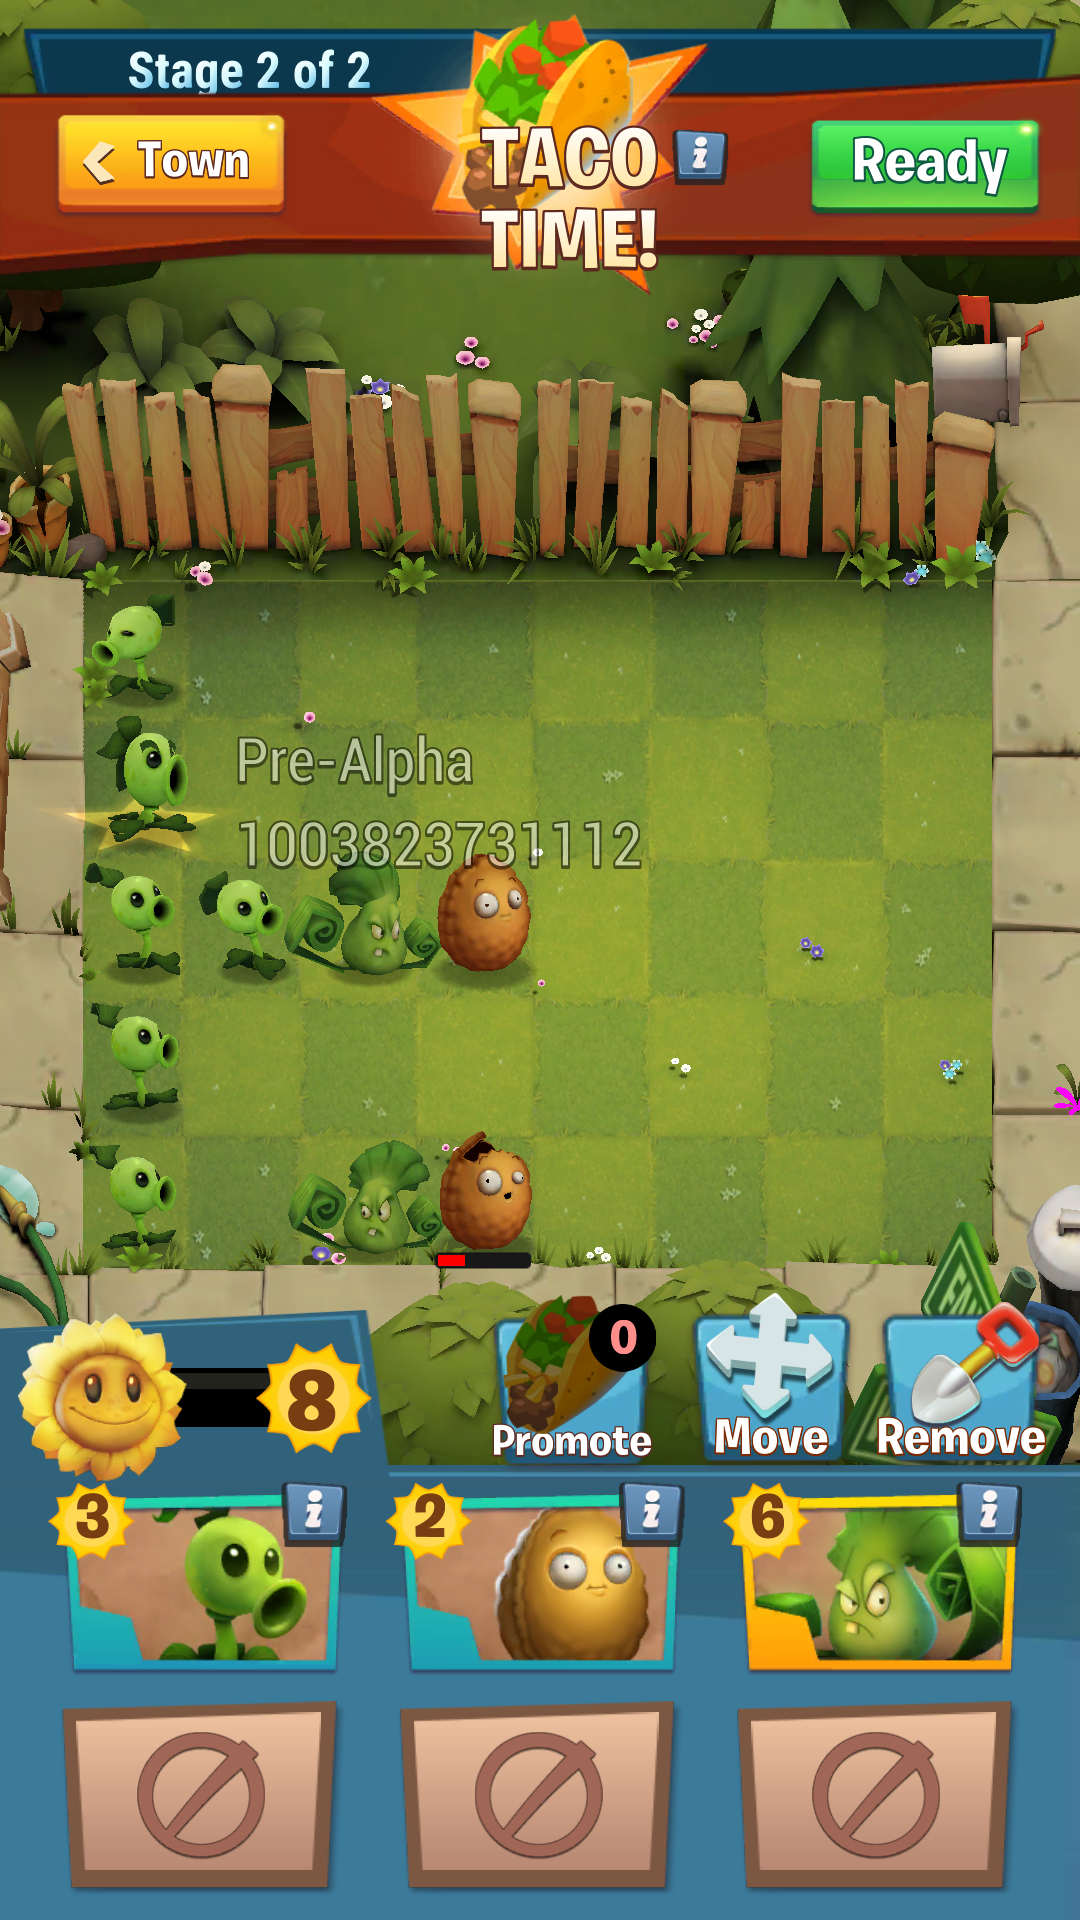 Plants vs Zombies 3 Confirmed and Now in Pre-Alpha, Early Screens Show 4  Types of Currencies